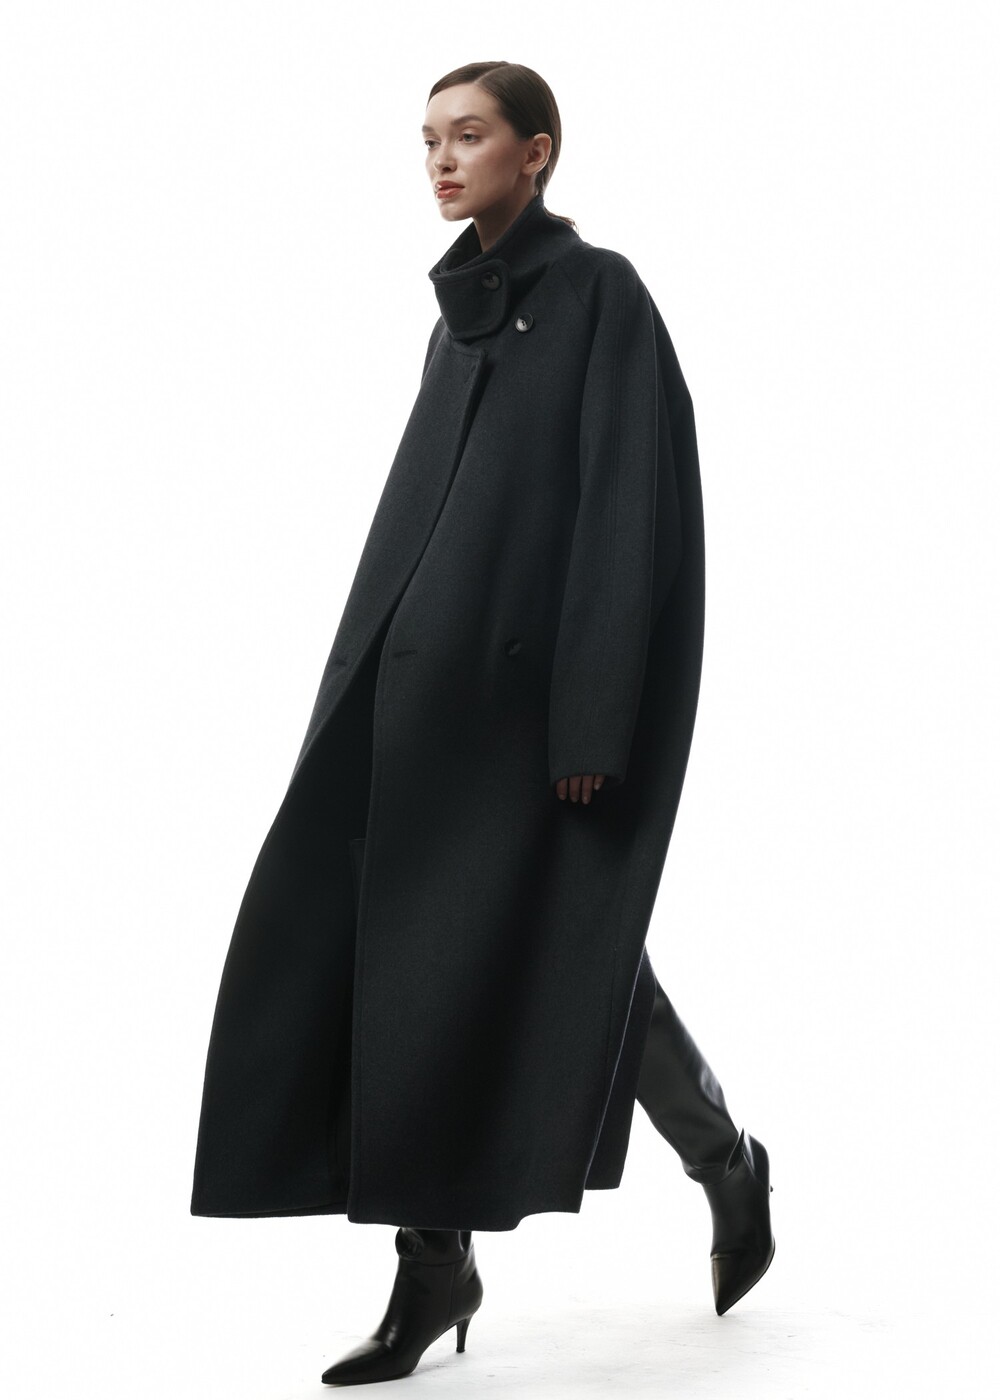 Coat with stand collar in graphite color